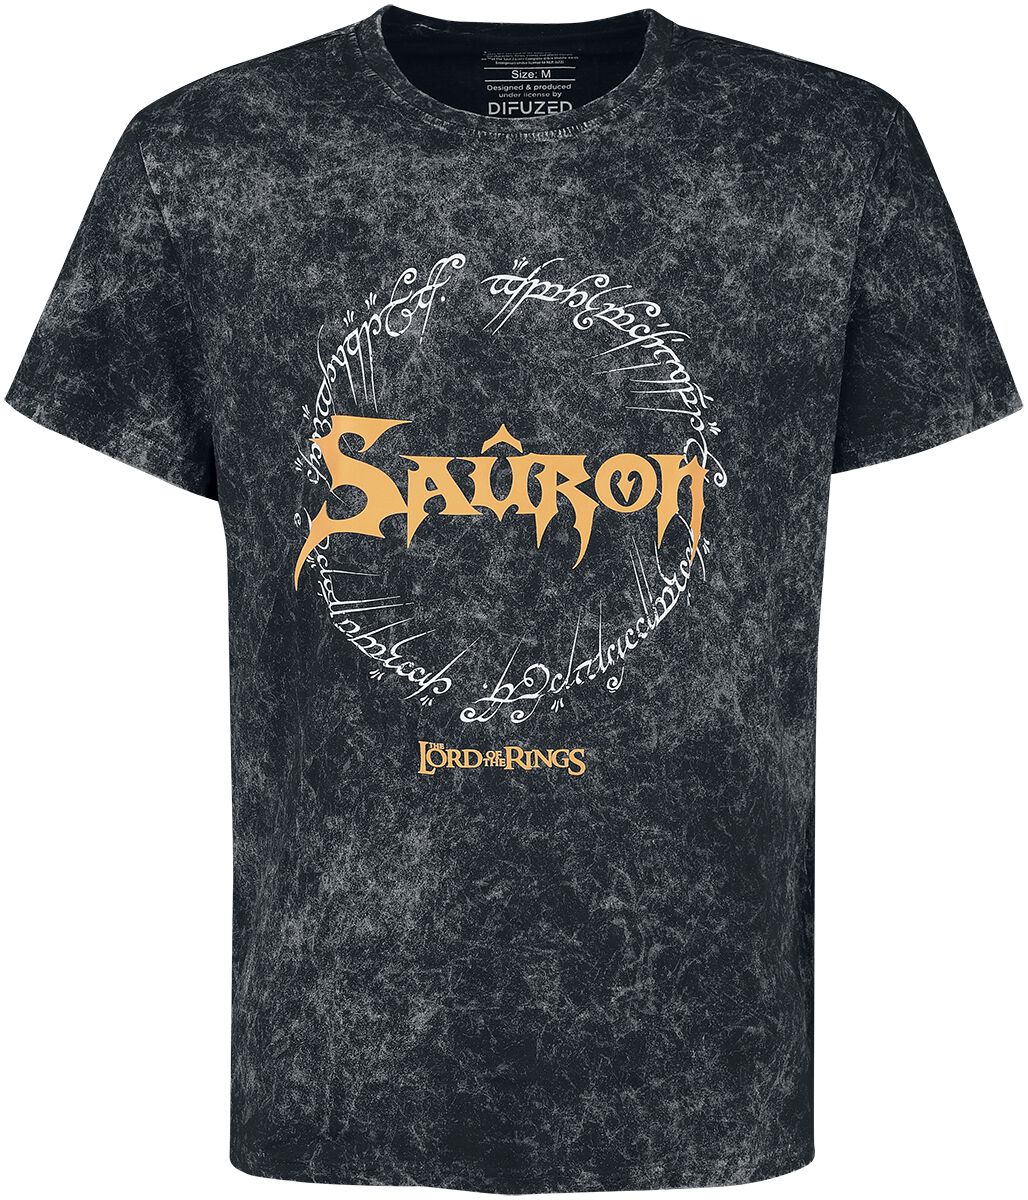 The Lord Of The Rings Sauron T-Shirt multicolour